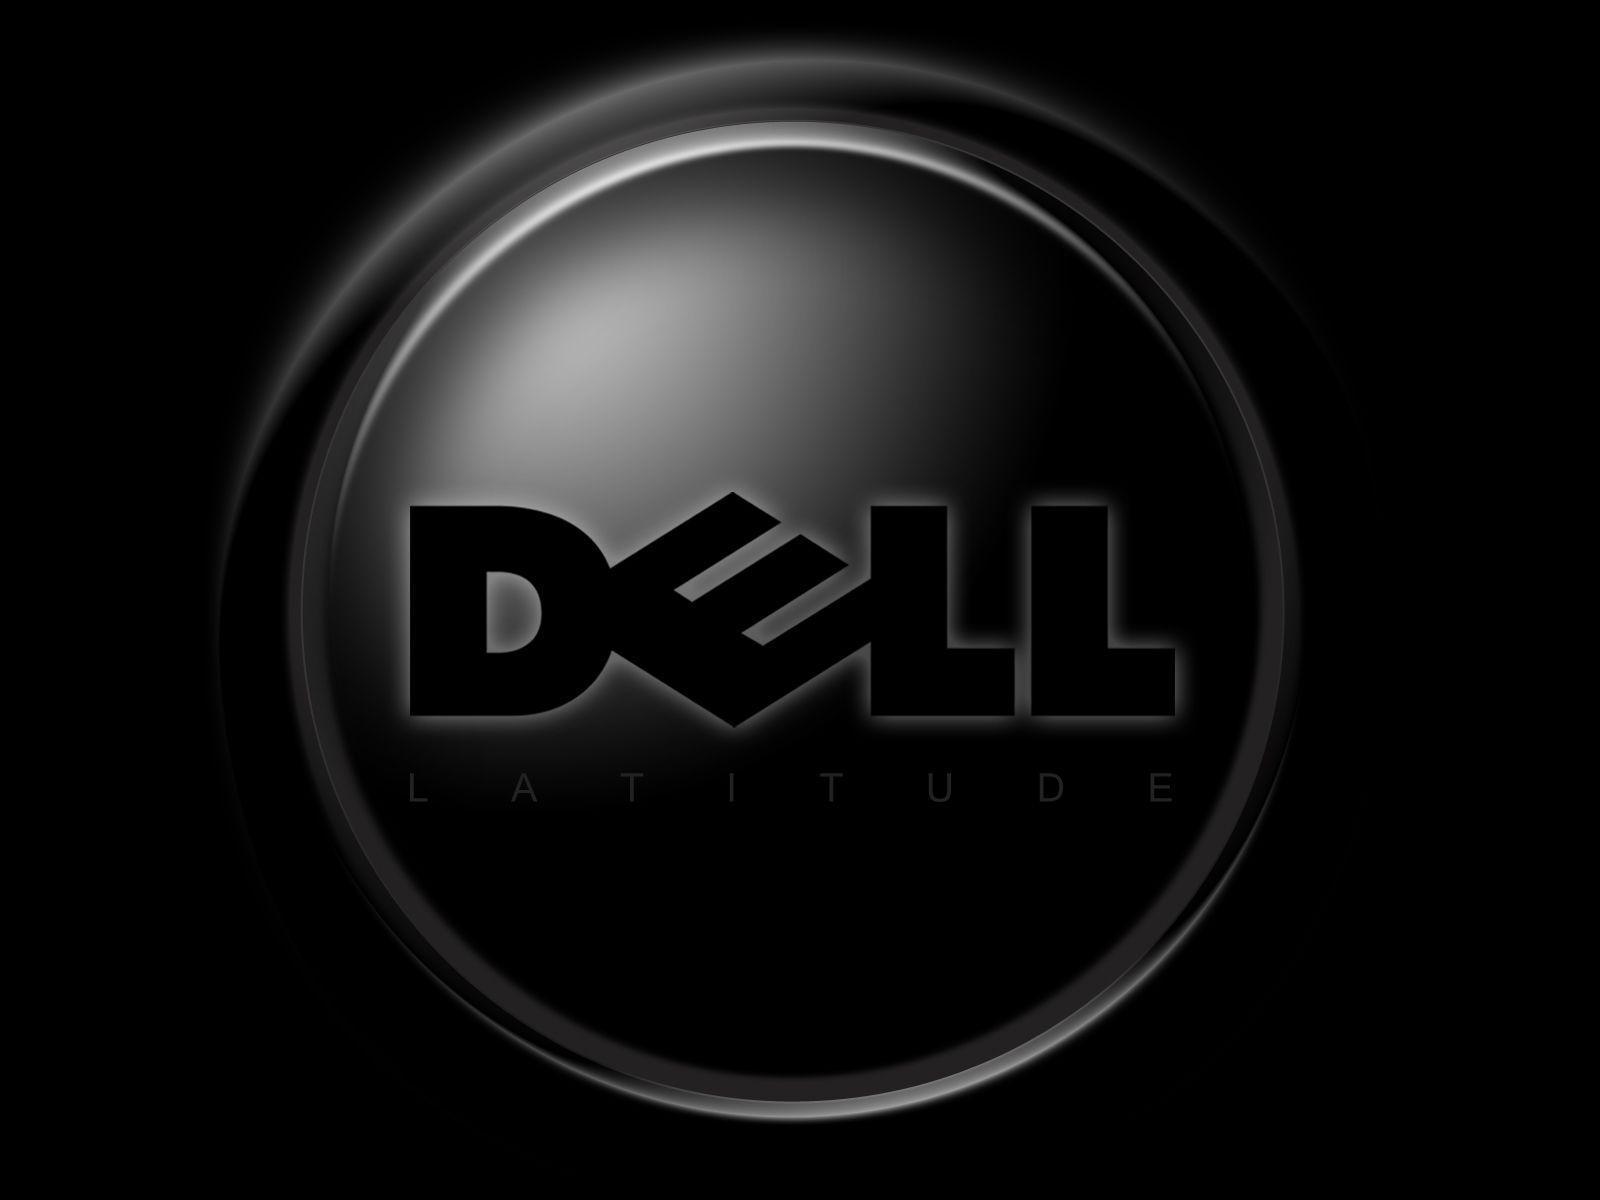 Dell Laptop HD Wallpaper Background Free Download 9336 HD Picture